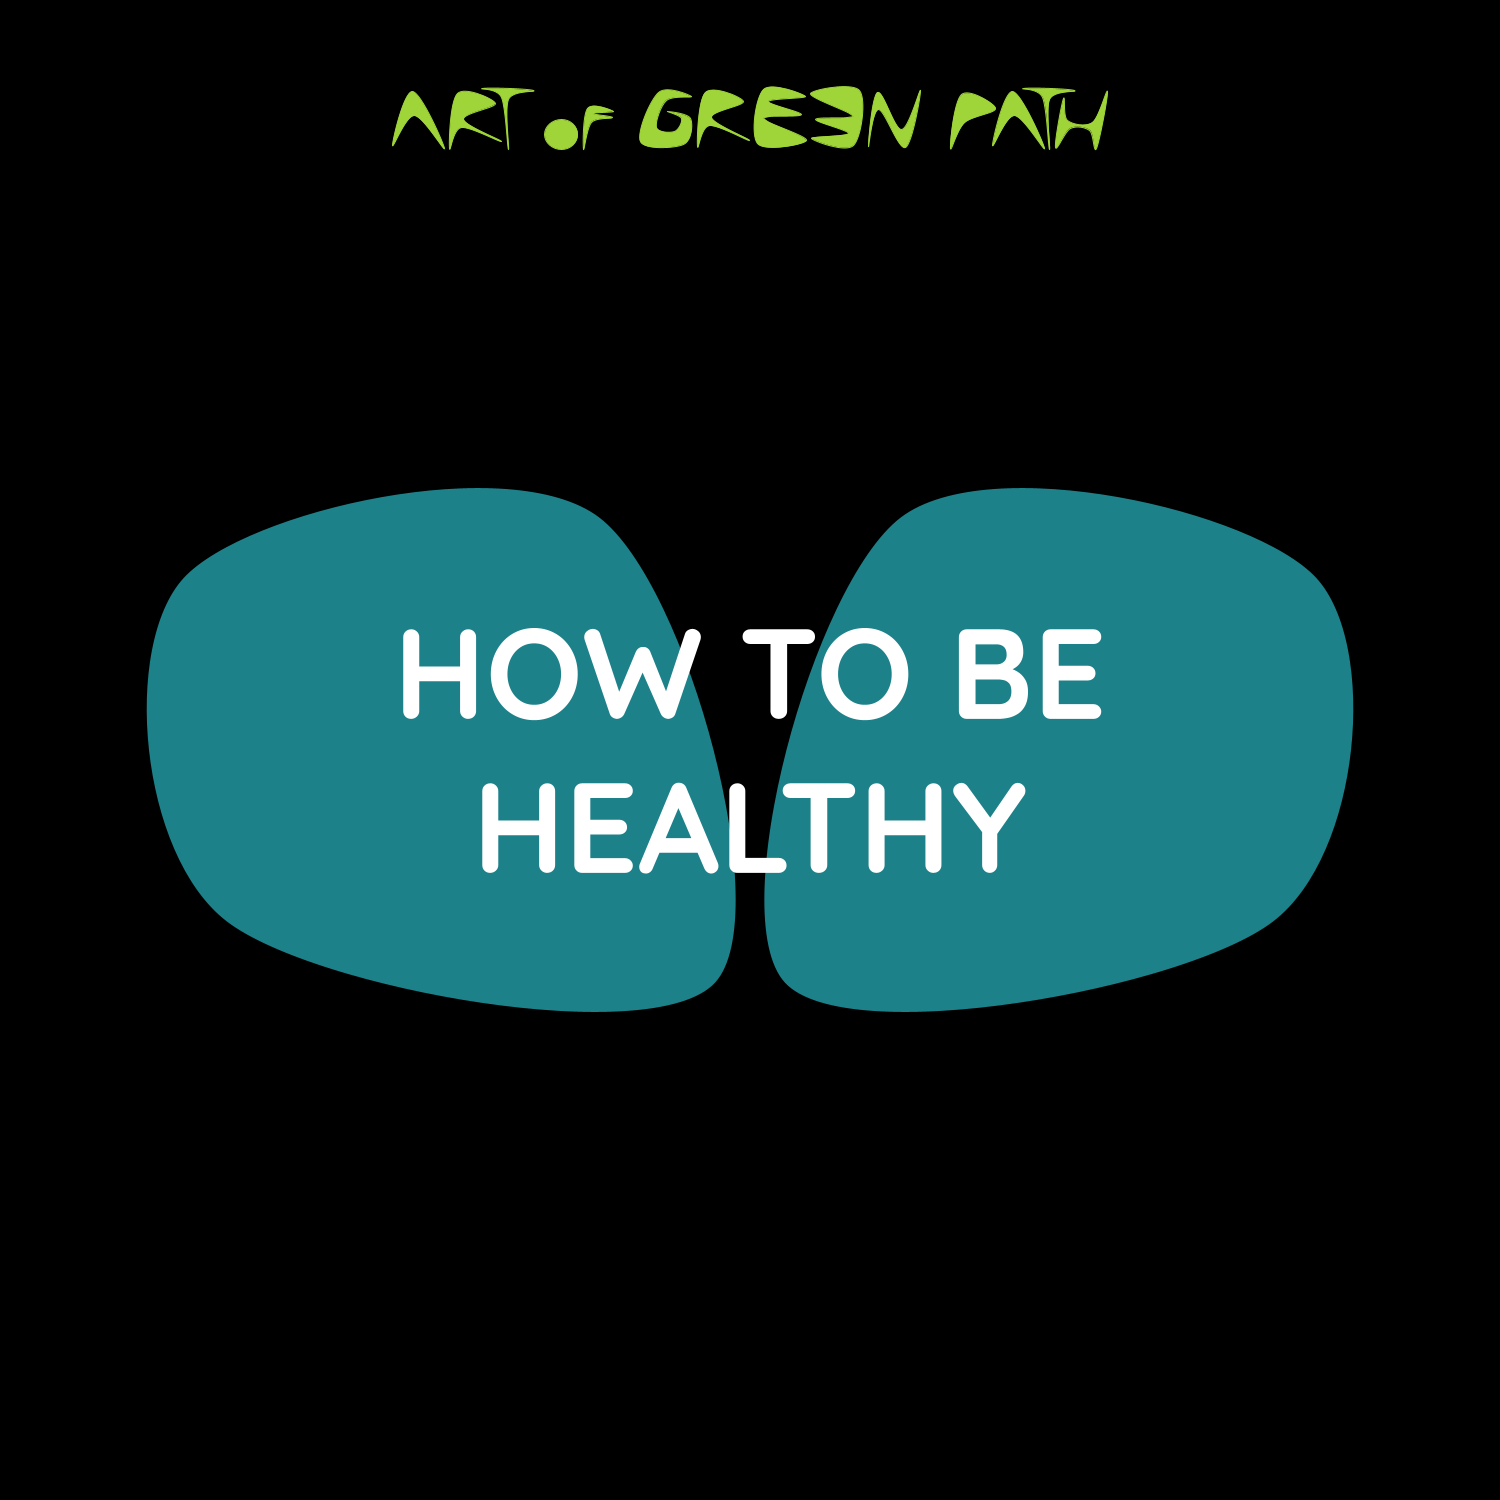 Art Of Green Path - Self Motivation - How To Be Healthy